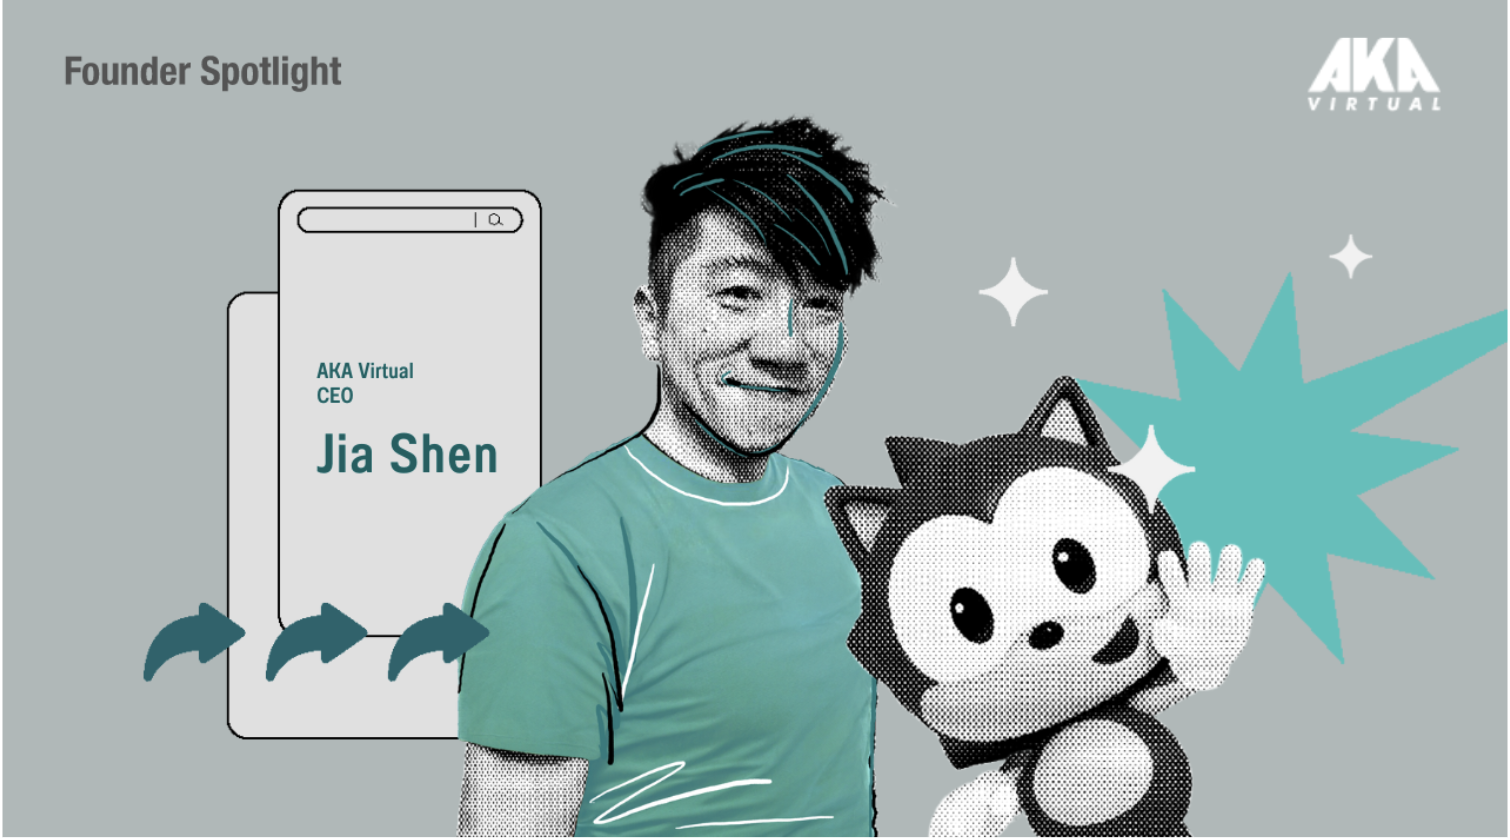 (Jia Shen, Founder and CEO of AKA Virtual. Credit: Cherubic Ventures)